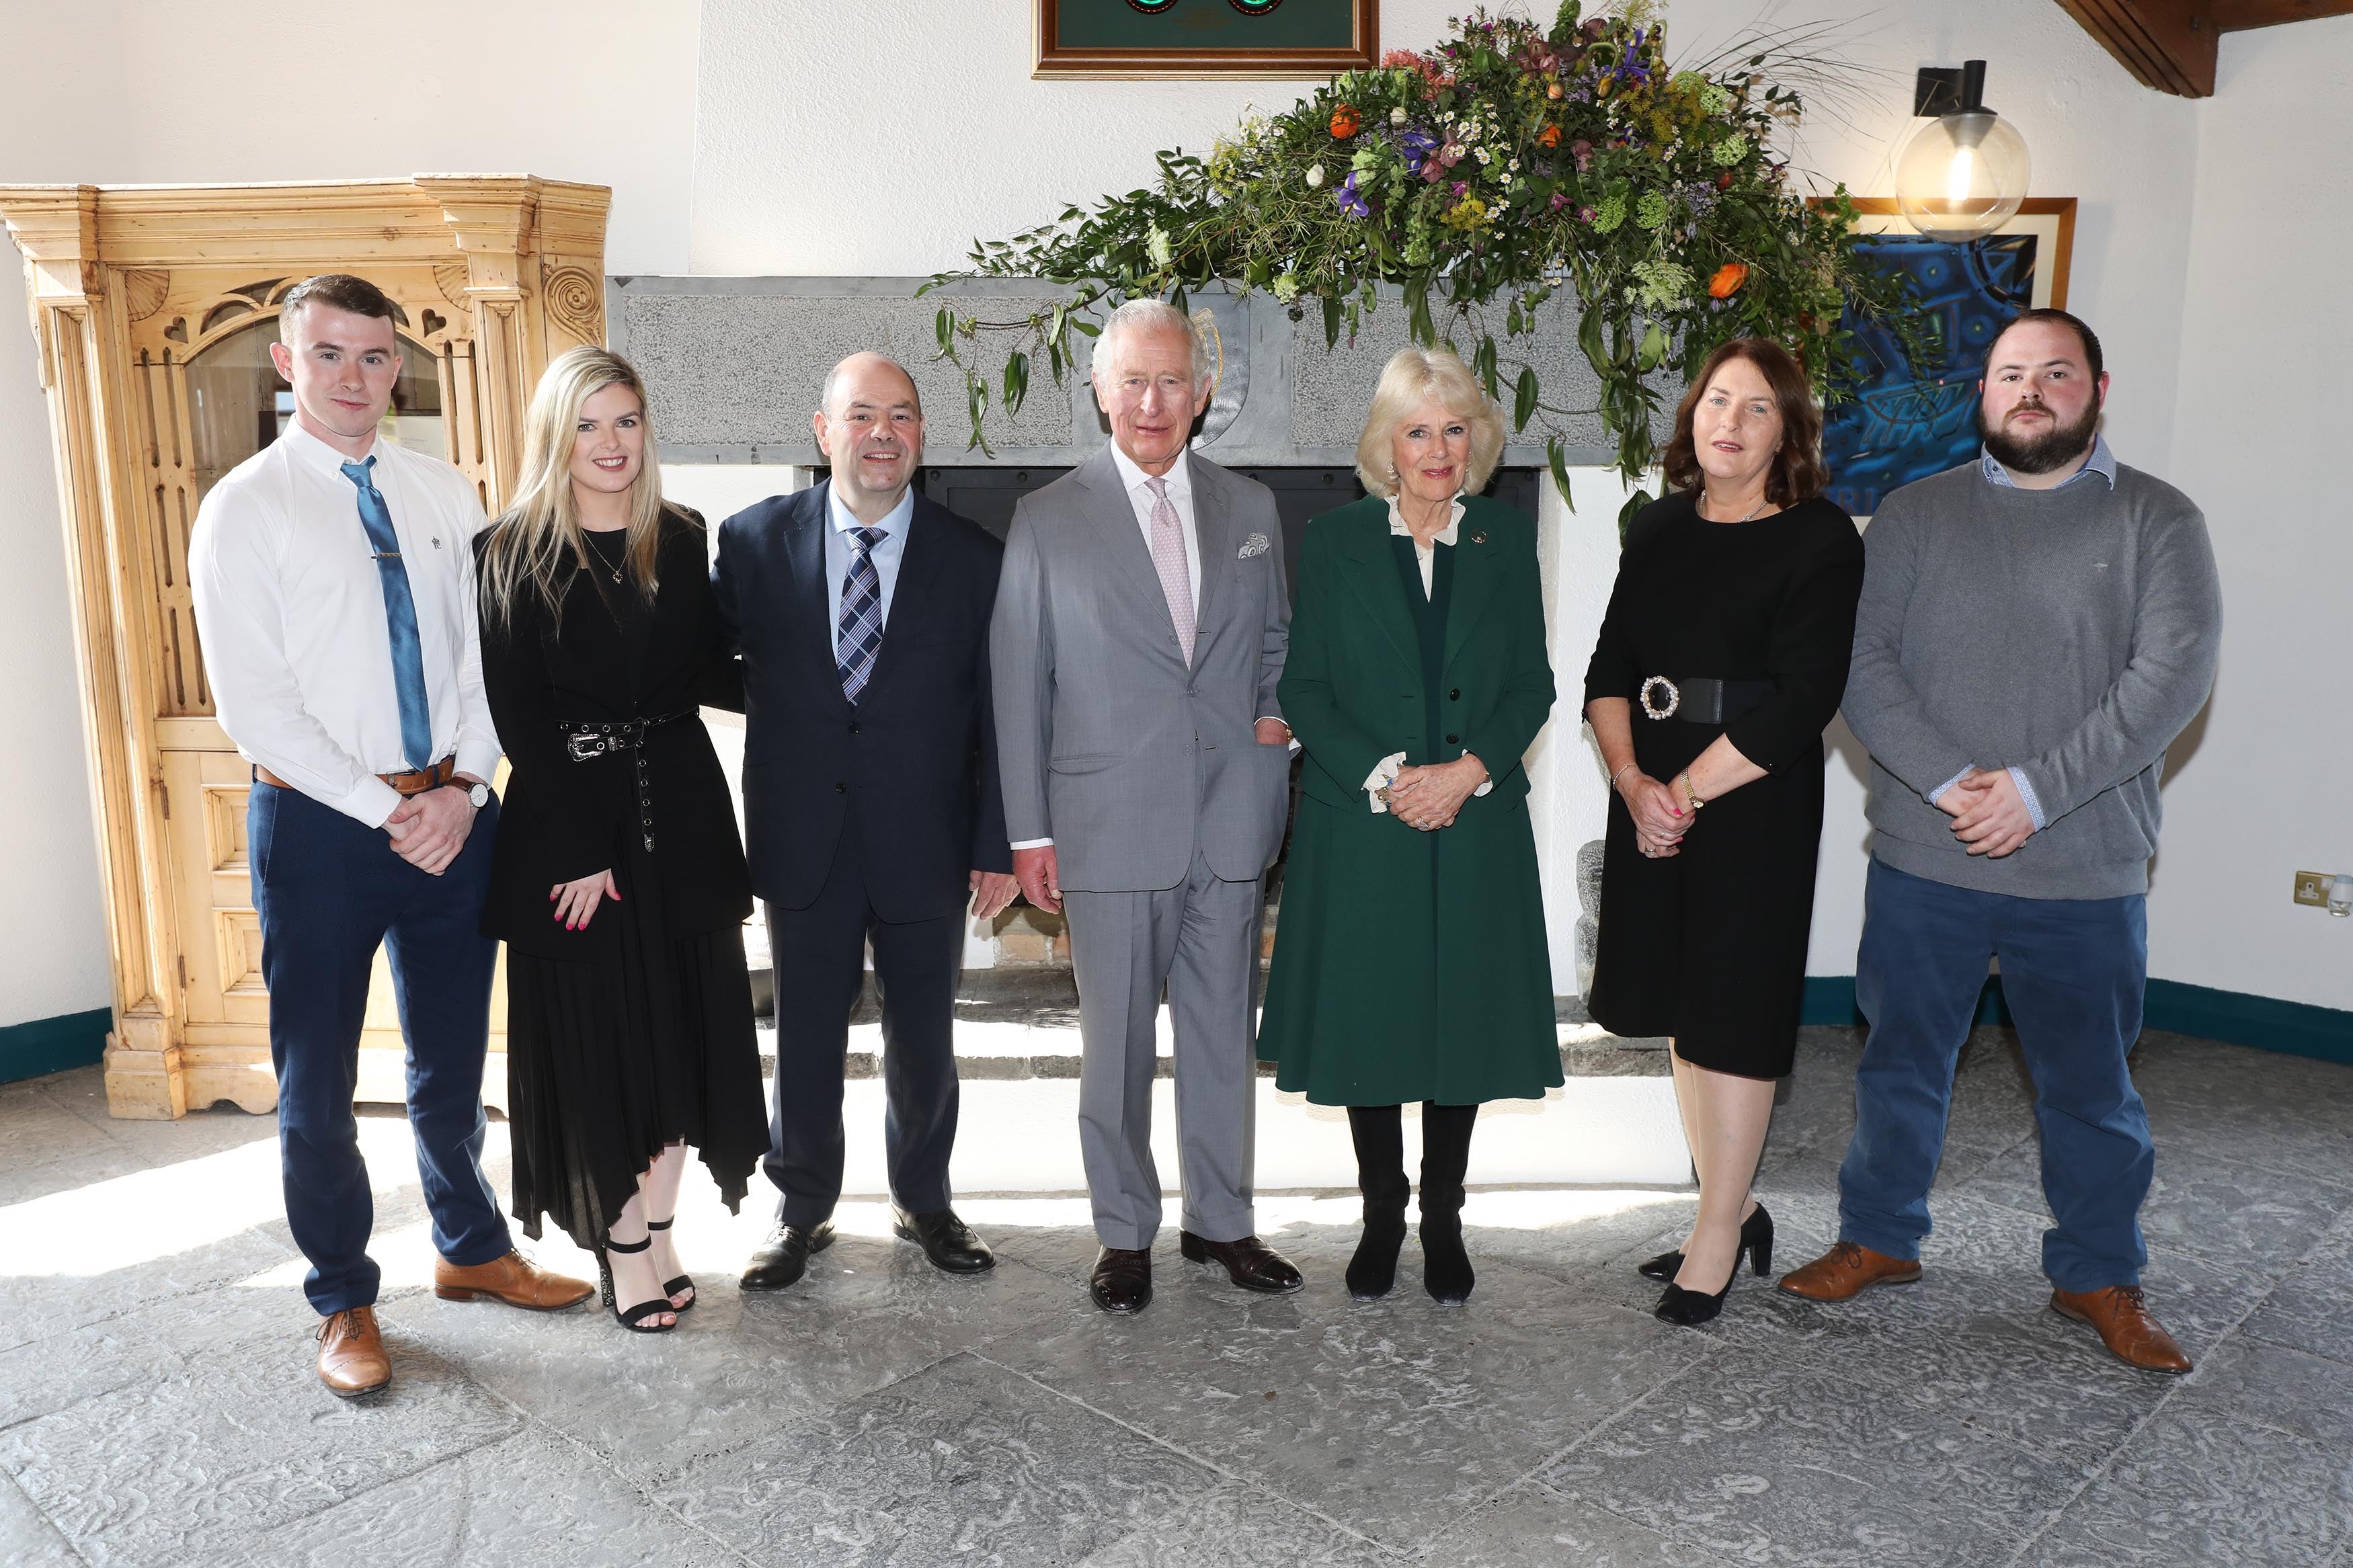 The Prince of Wales and the Duchess of Cornwall alongside the family of Ashling Murphy at the Bru Boru Cultural Centre in Cashel, Co Tipperary (Julien Behal Photography/PA)